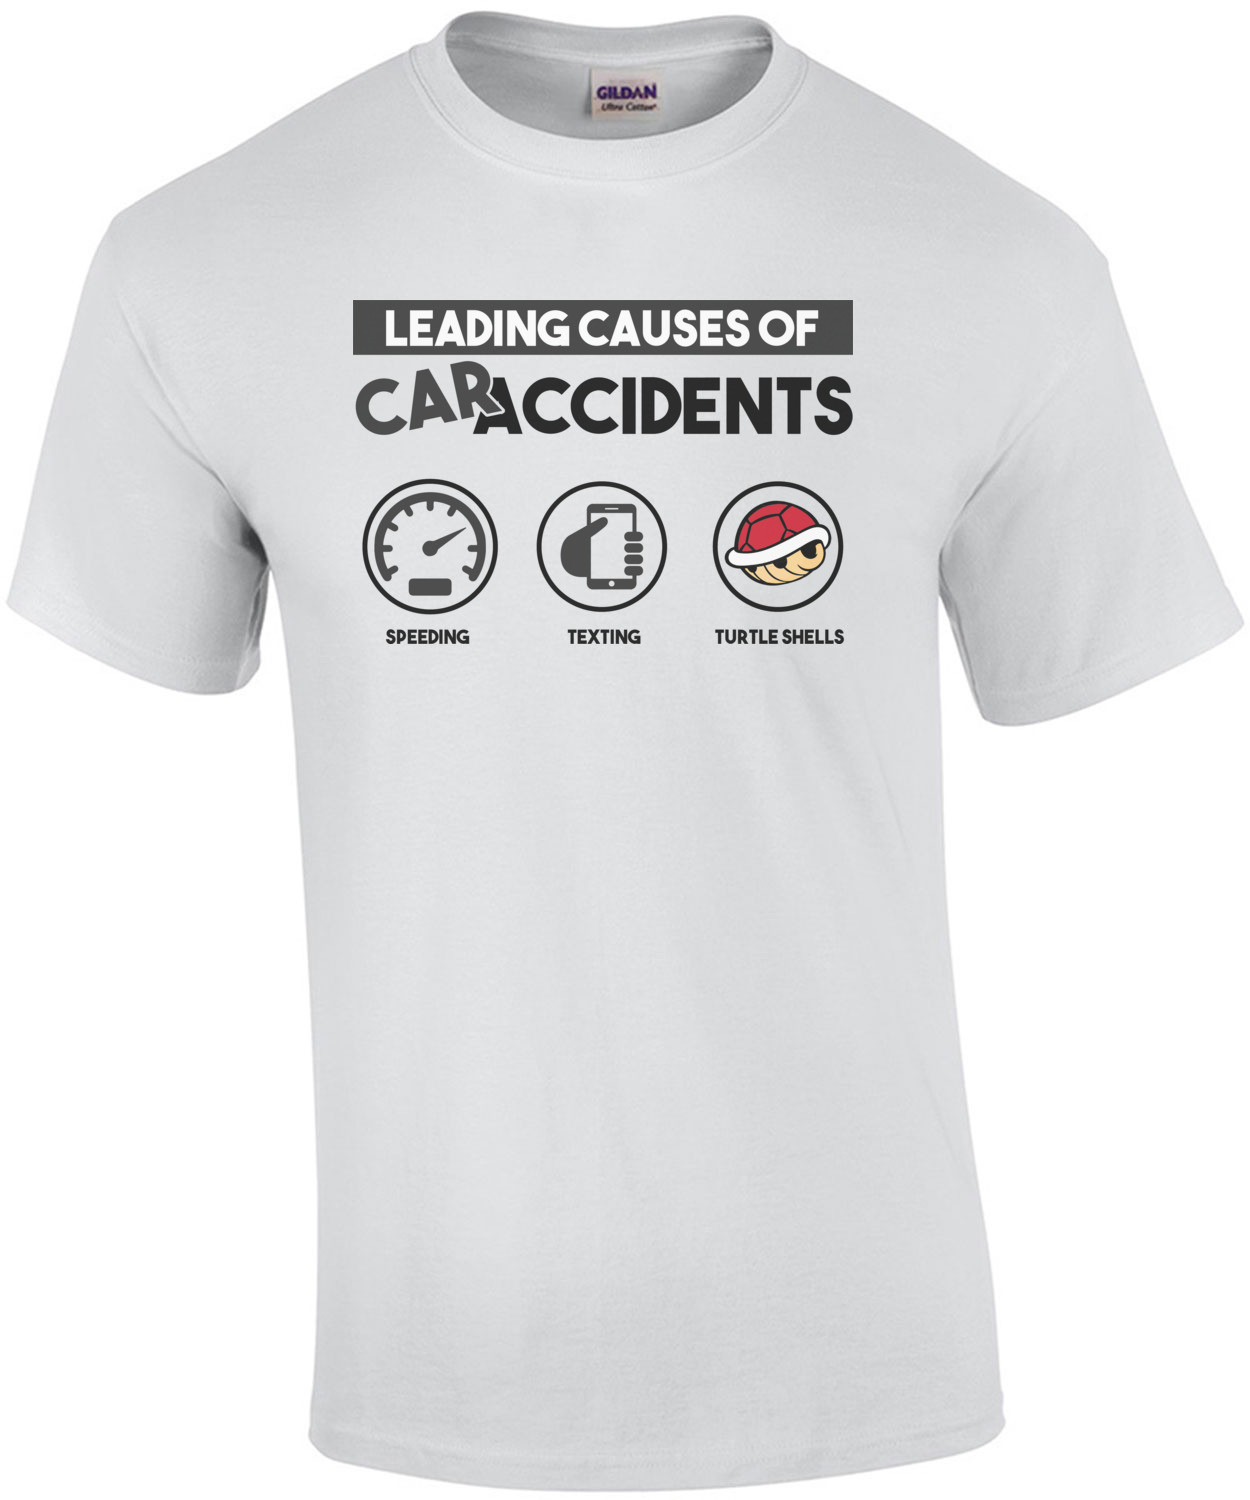 Leading causes of car accidents - speeding texting turtle shells - funny Super Mario Kart t-shirt